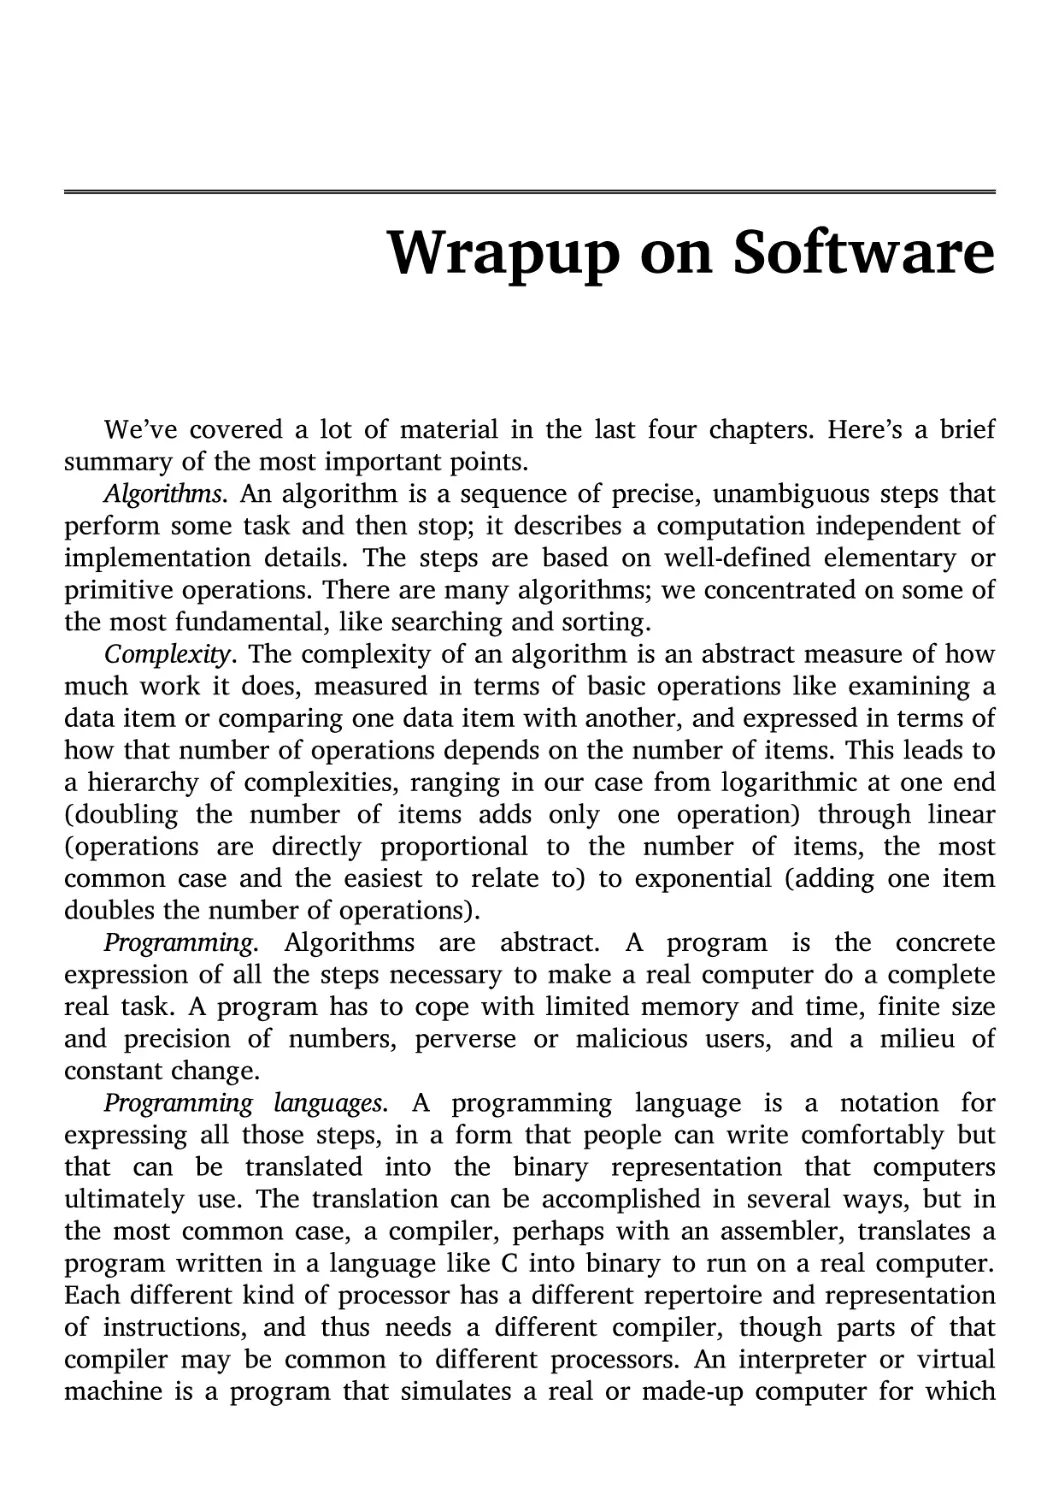 Wrapup on Software